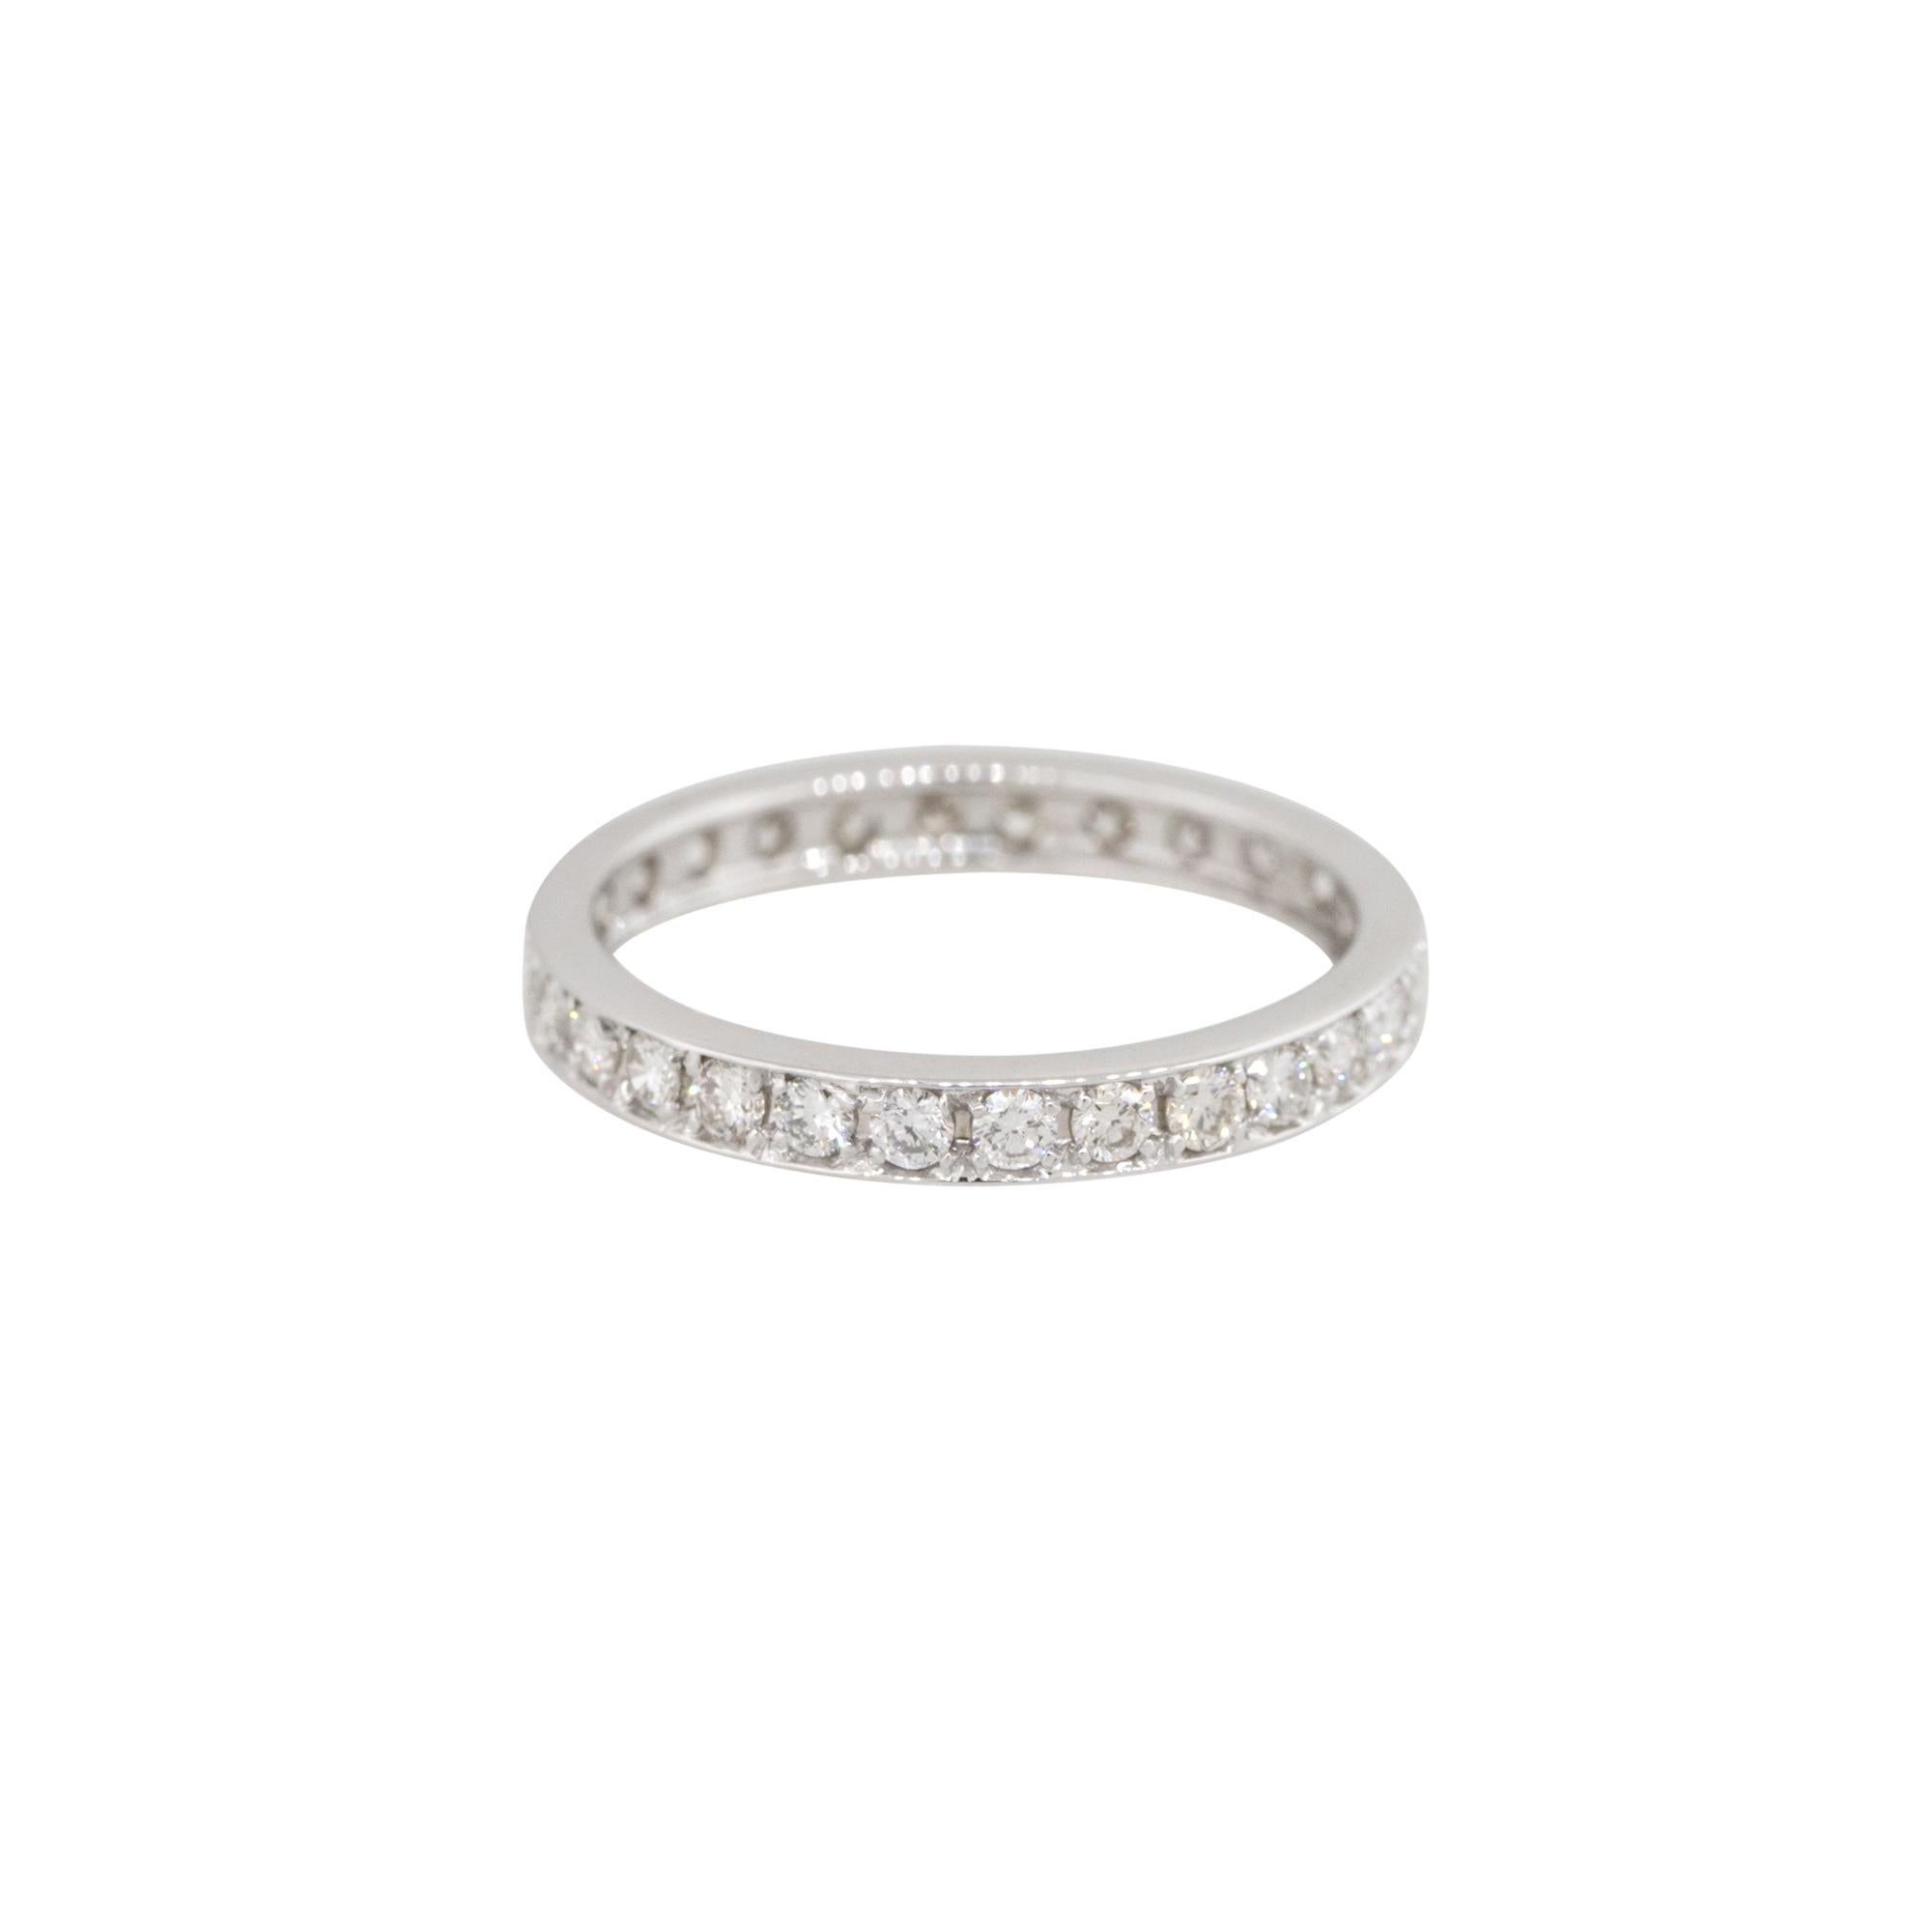 14k White Gold 0.50ctw Round Brilliant Cut Diamond Eternity Band
Style: Women's Round Brilliant Cut Diamond, Prong Set Eternity Band
Material: 14k White Gold
Diamond Details: There are approximately 0.50 carats of prong set, Round Brilliant cut